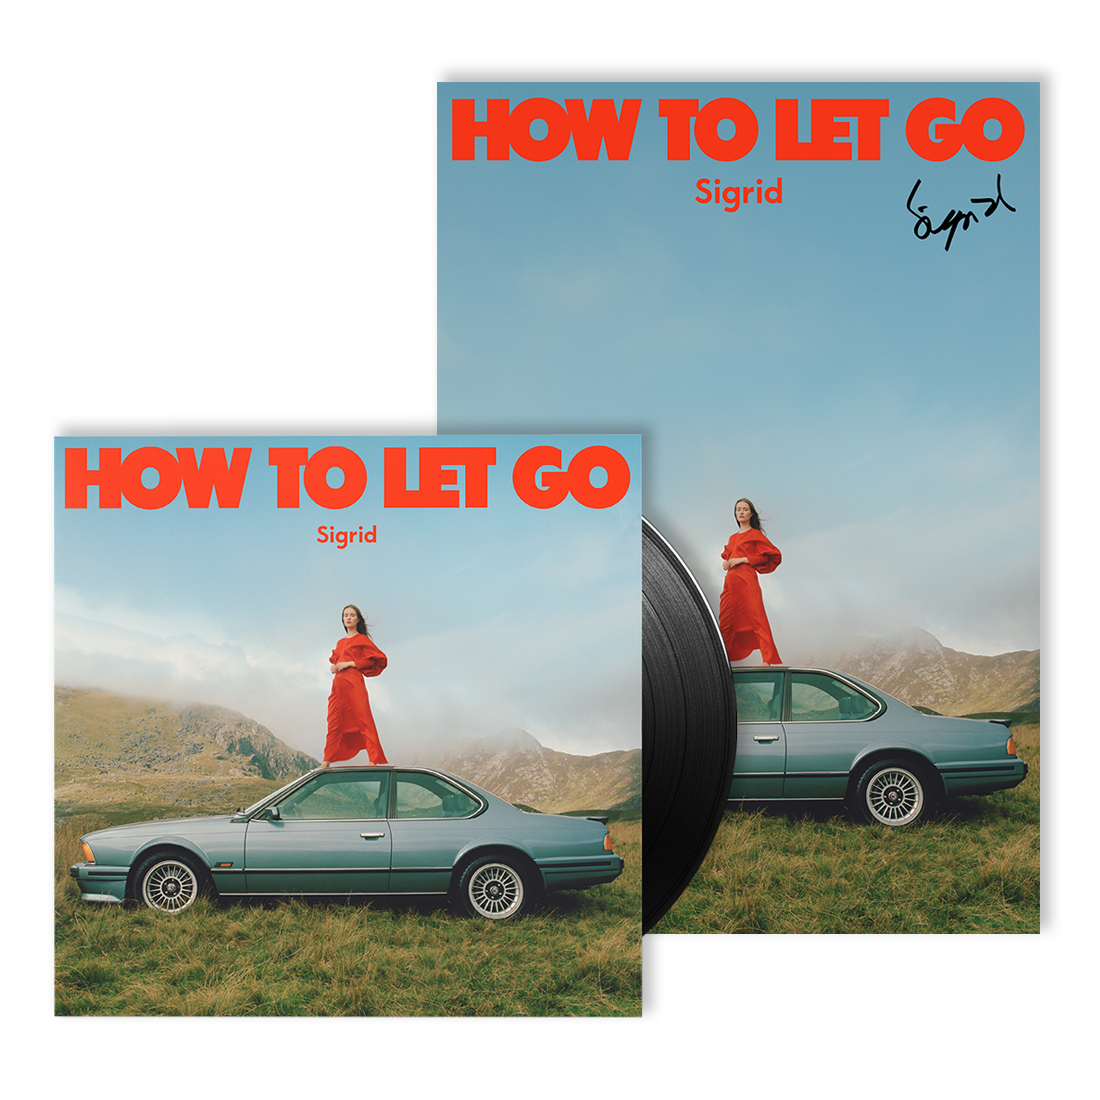 How To Let Go: Vinyl LP + Limited Signed Poster